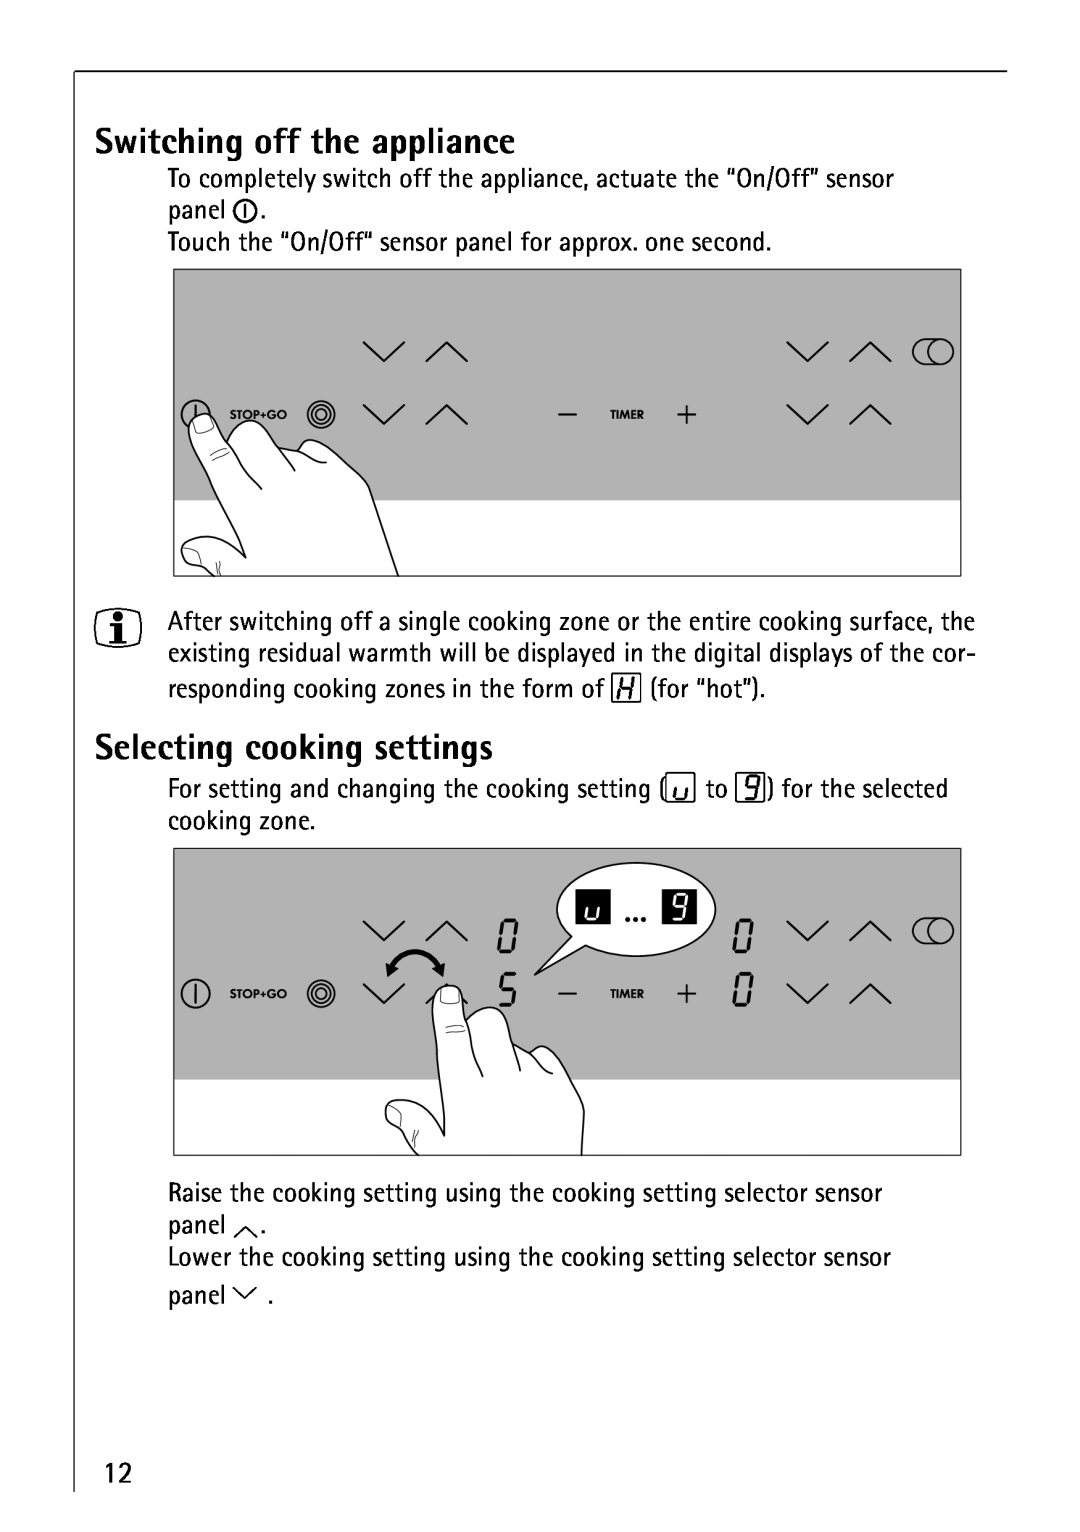 Electrolux 66300KF-an installation instructions Switching off the appliance, Selecting cooking settings 